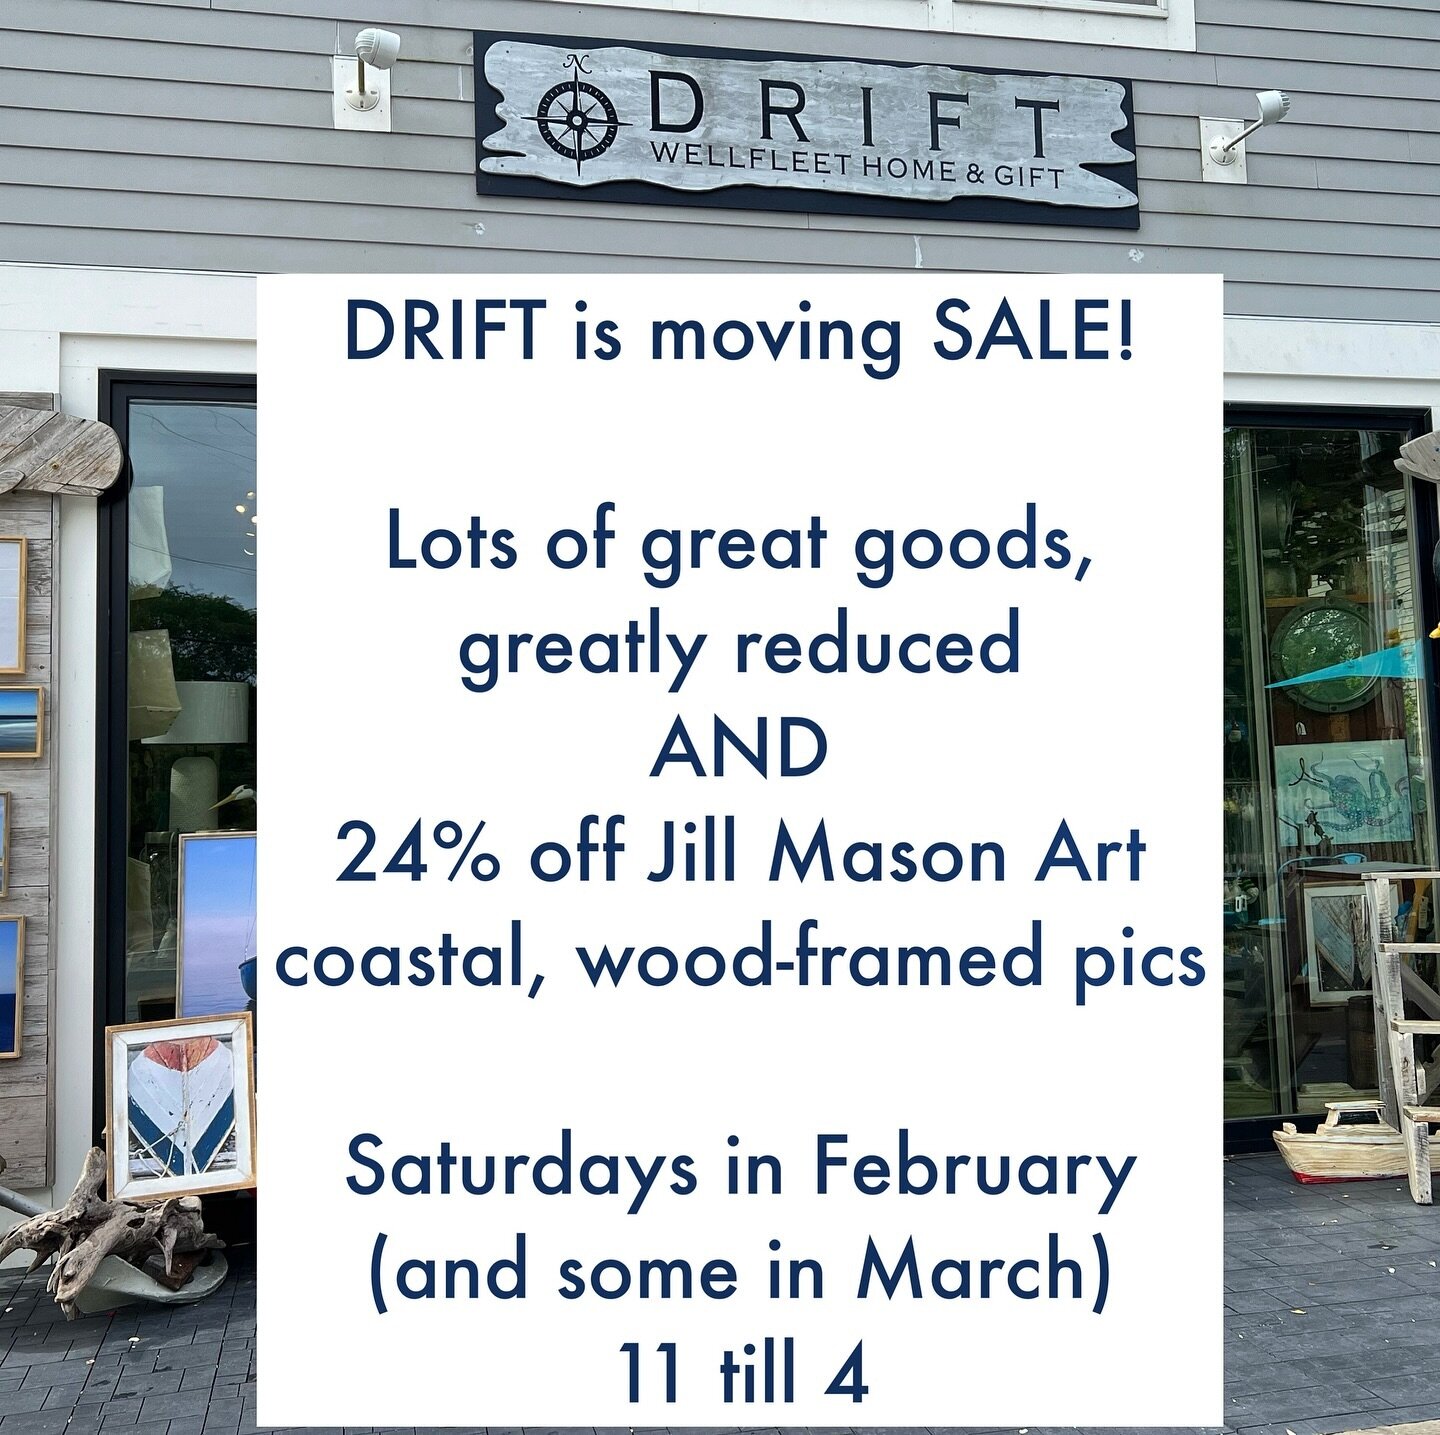 This spring, @DRIFTwellfleet will be welcoming you at a new location&mdash;still in wonderful Wellfleet&mdash;the lovely, historic building at 361 West Main Street.

Until then, there will be lots of great goods, greatly reduced, at DRIFT&rsquo;s cur